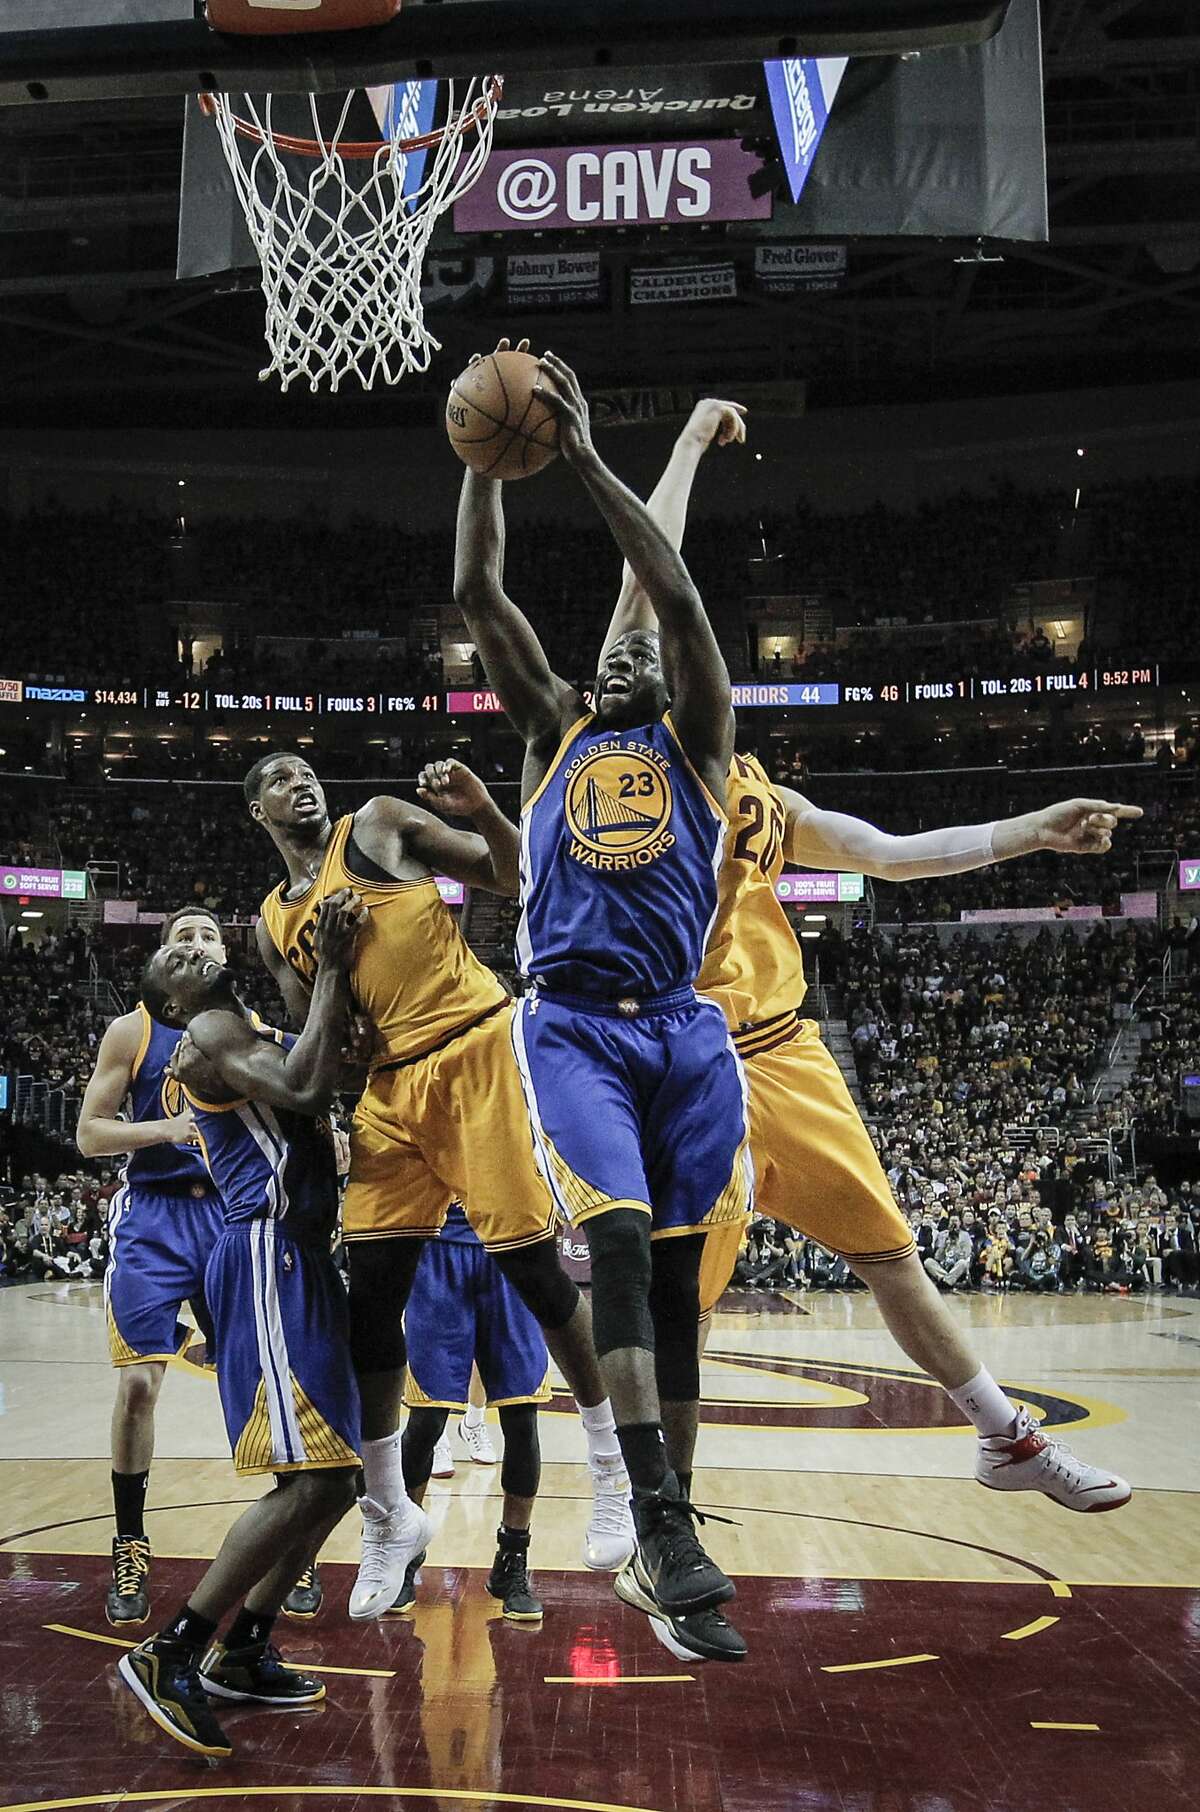 Golden State Warriors' Draymond Green pulls down a rebound in the first half during Game 4 of The NBA Finals between the Golden State Warriors and Cleveland Cavaliers at The Quicken Loans Arena on Thursday, June 11, 2015 in Cleveland, Ohio.